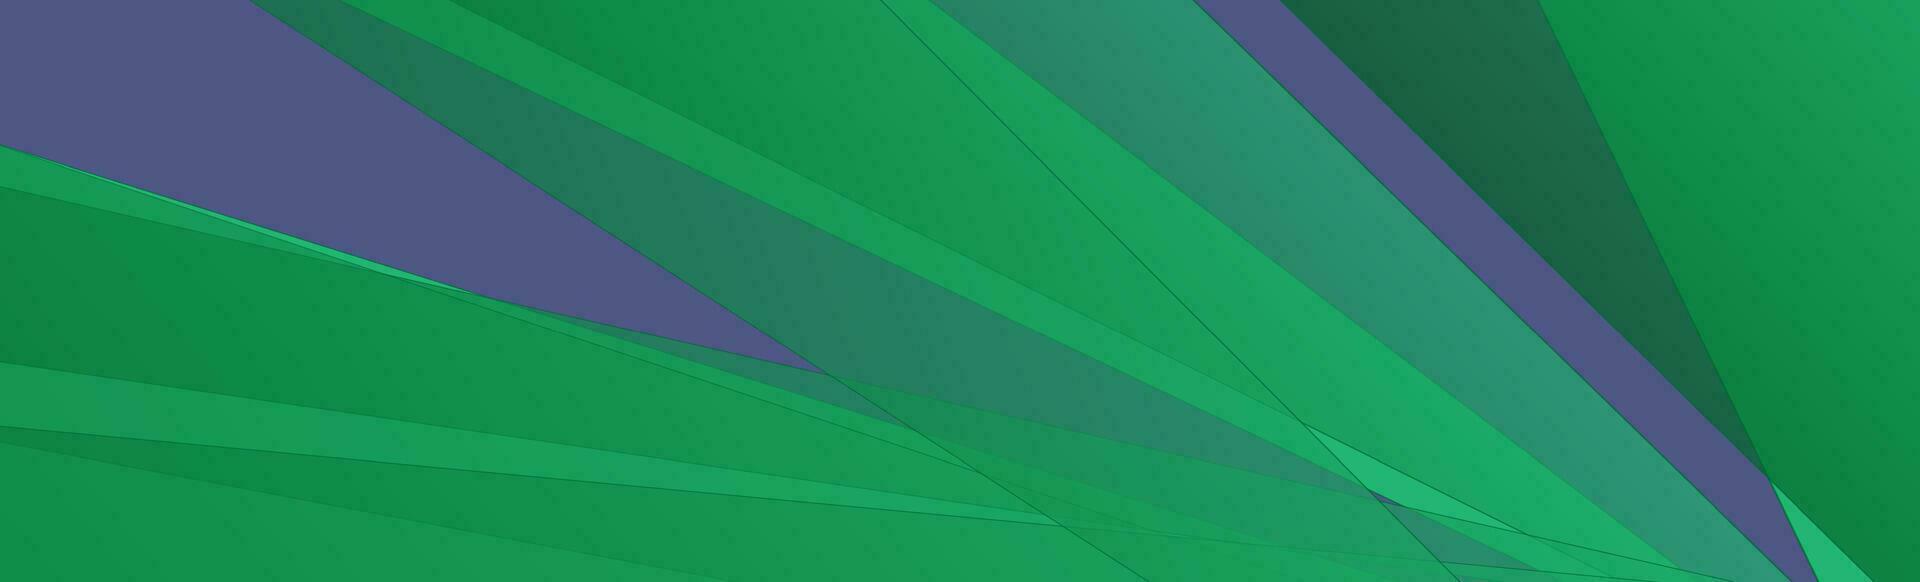 Bright green violet stripes abstract background vector